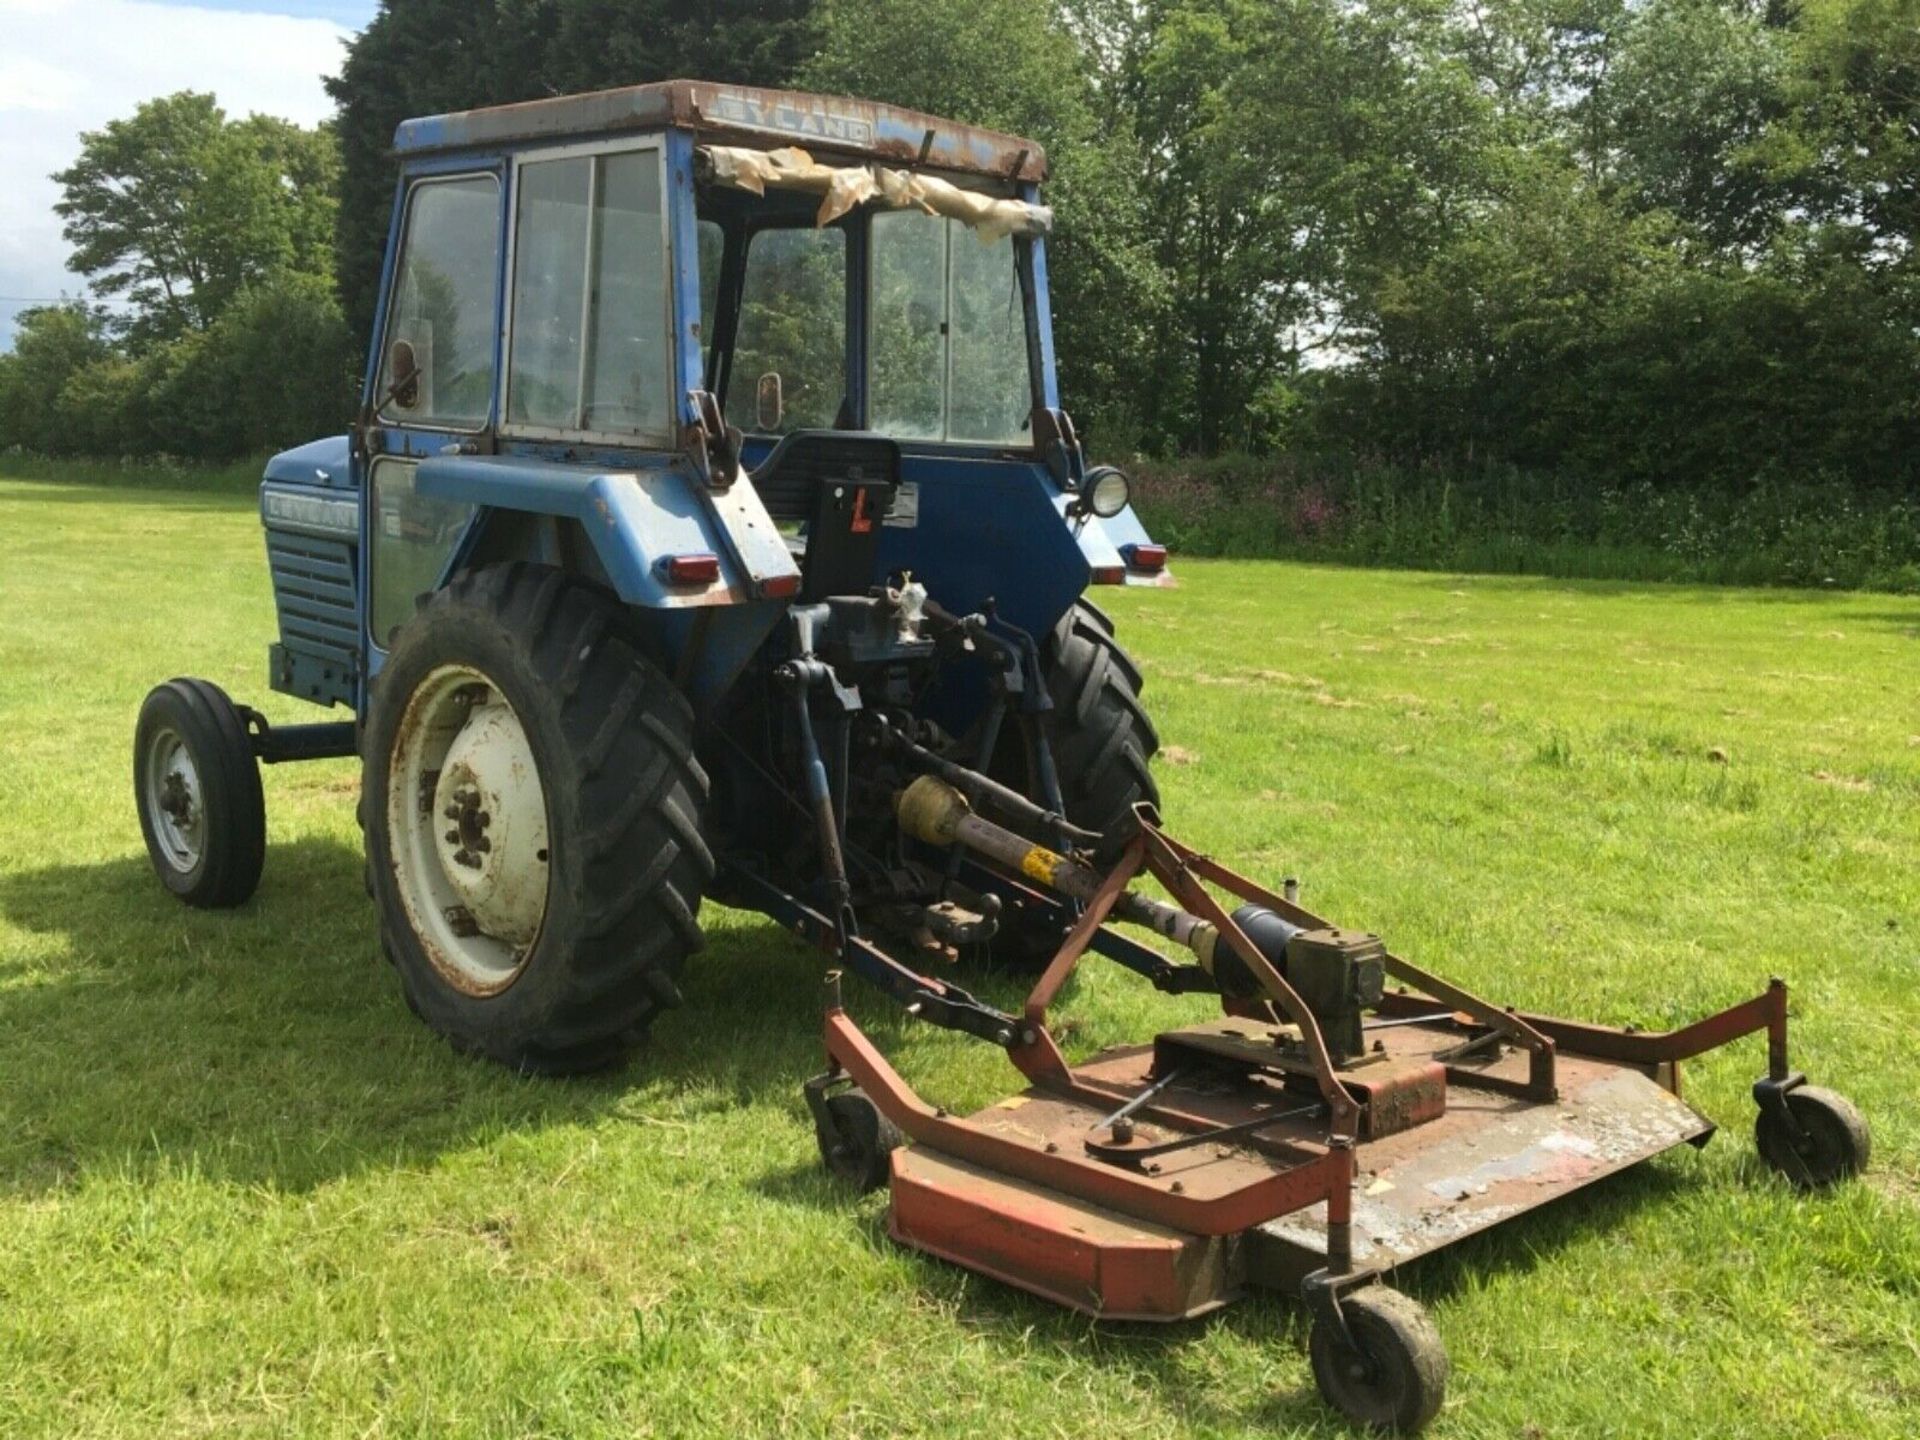 LEYLAND 253 TRACTOR 2WD DIESEL TRACTOR, RUNS & WORKS AS IT SHOULD *NO VAT* - Image 3 of 3